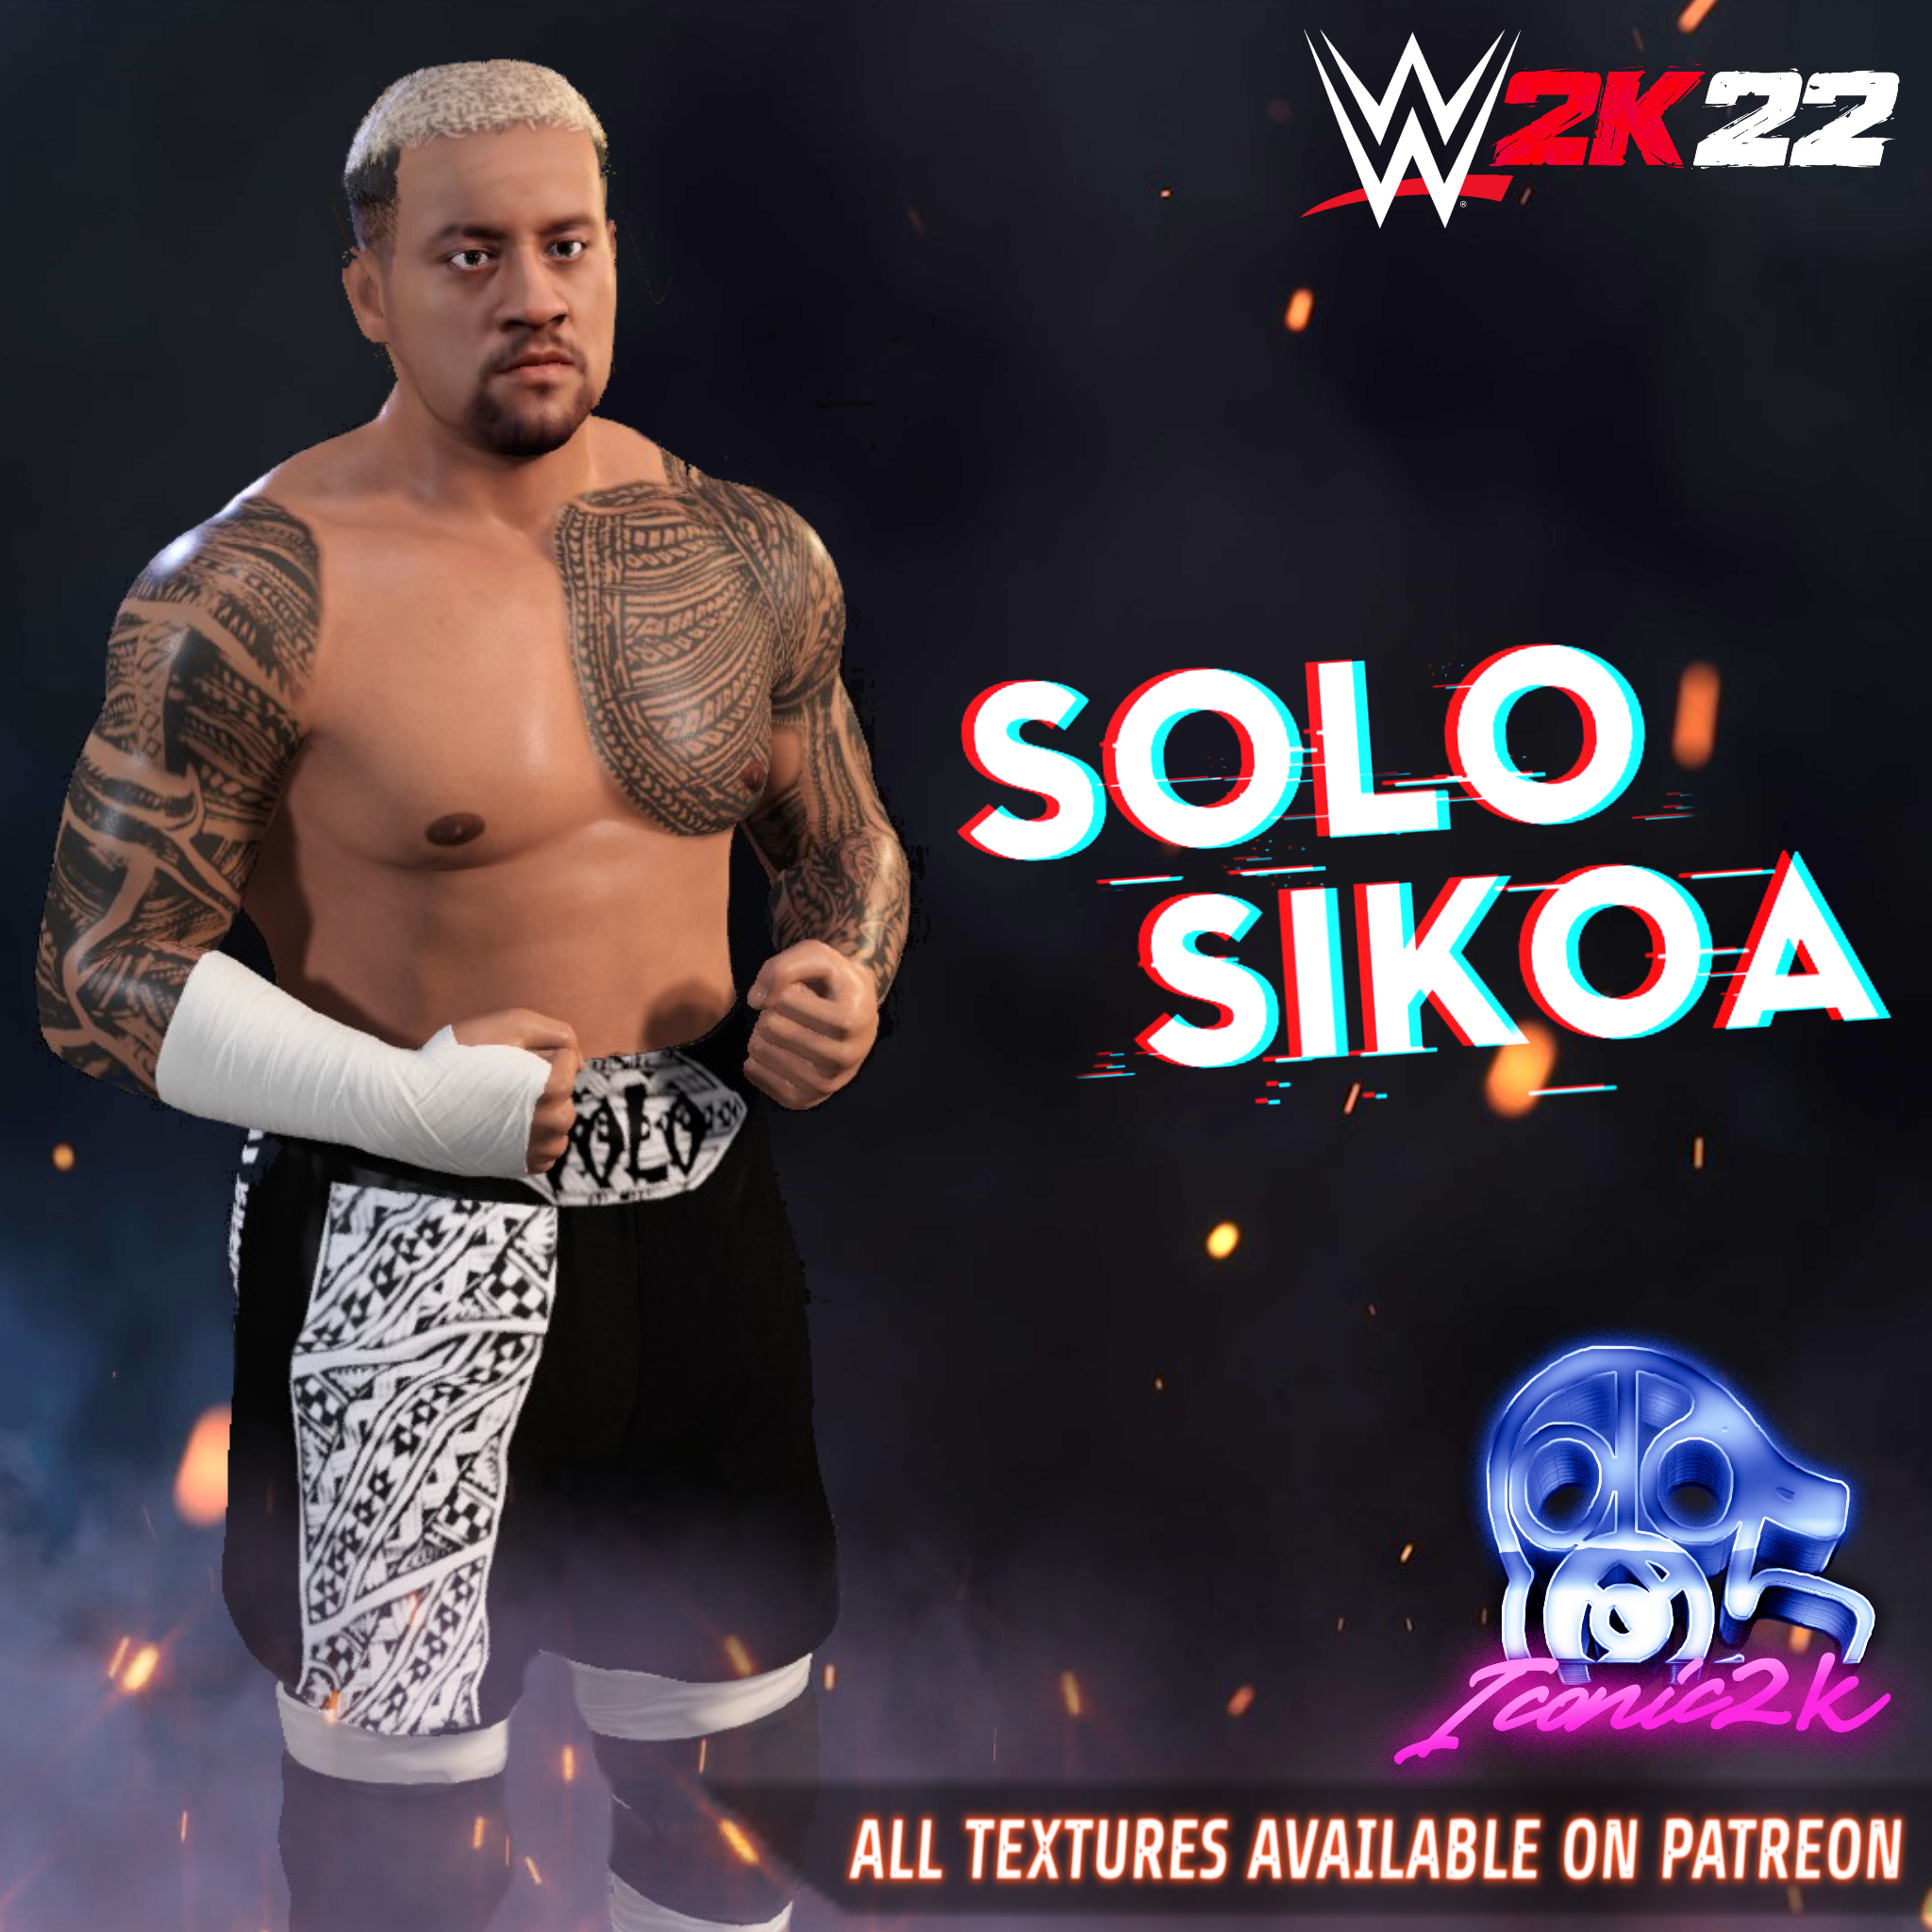 Solo Sikoa CAW available now in WWE 2K22. Use the search tag #ICONIC2K